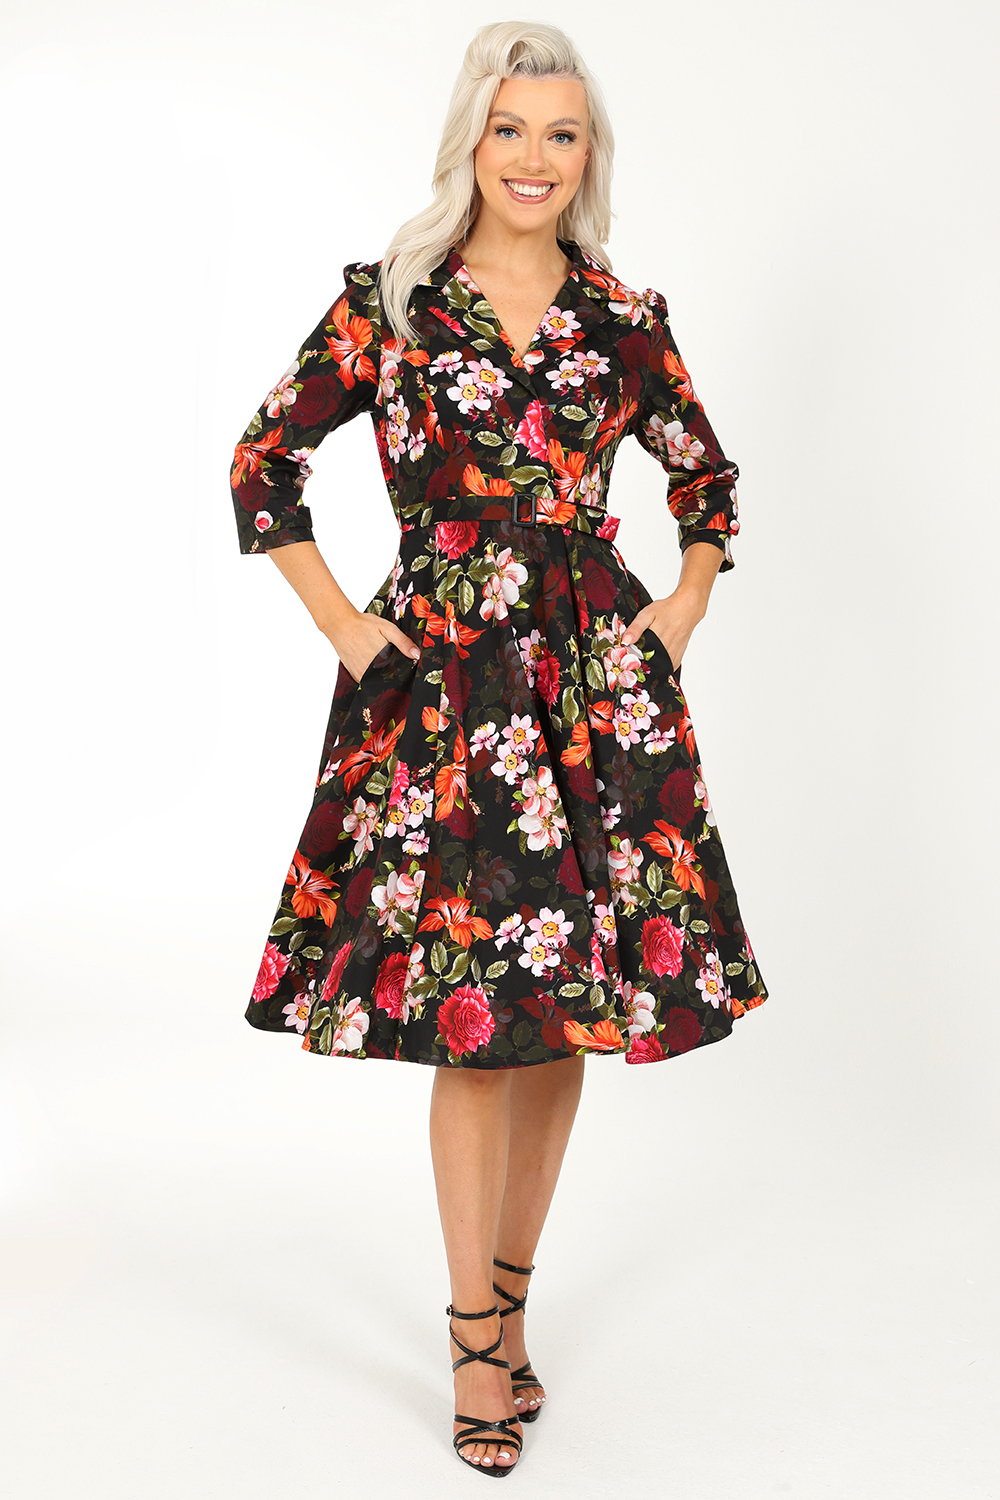 Diana Lilly Floral Swing Dress